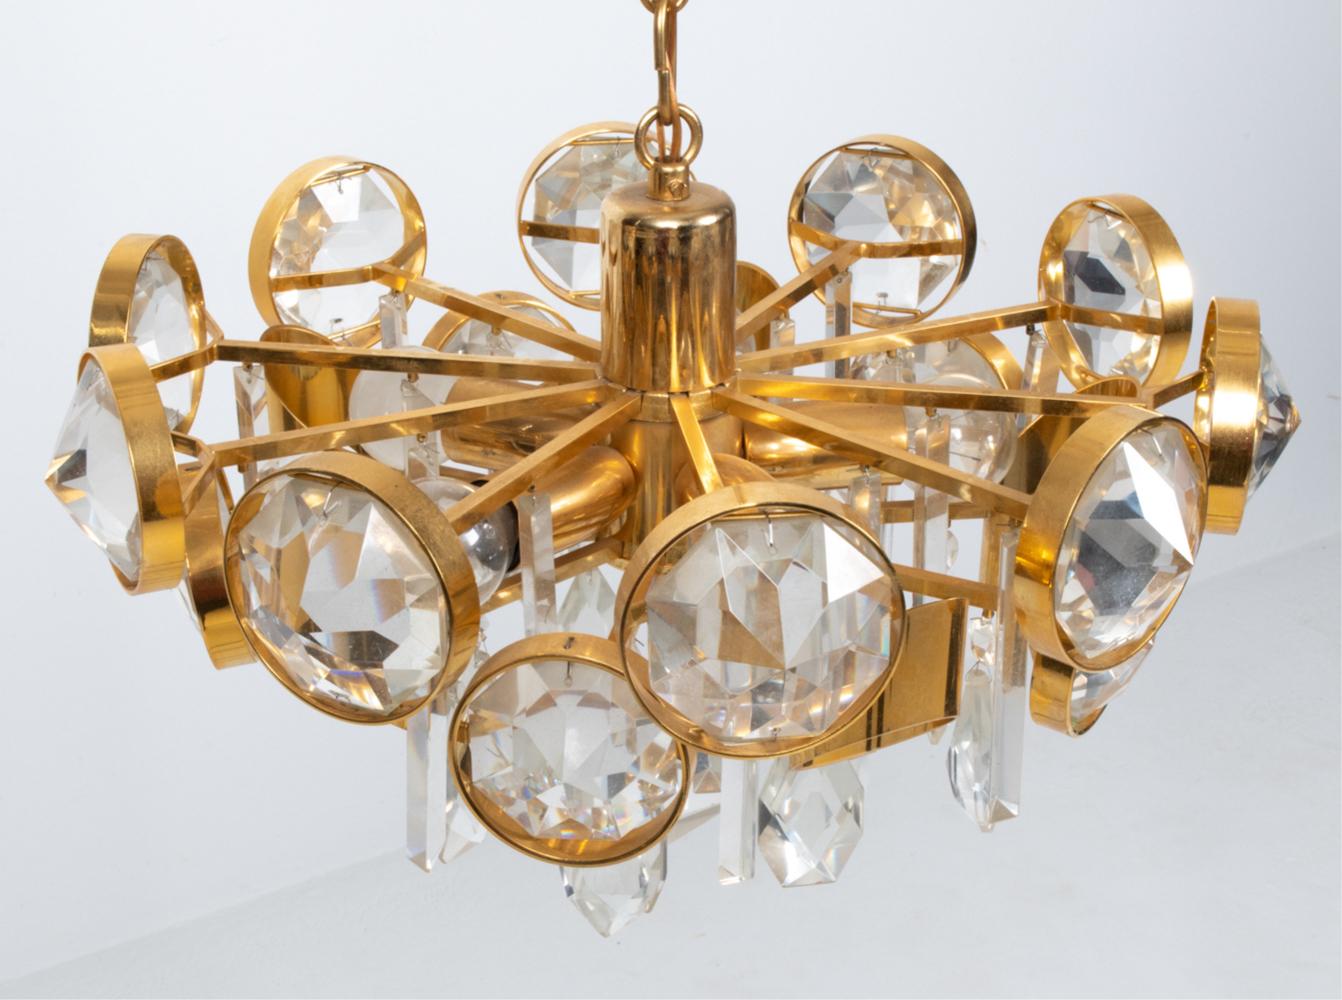 Chandelier in gilded Brass and Crystal Glass by Palwa, Austria